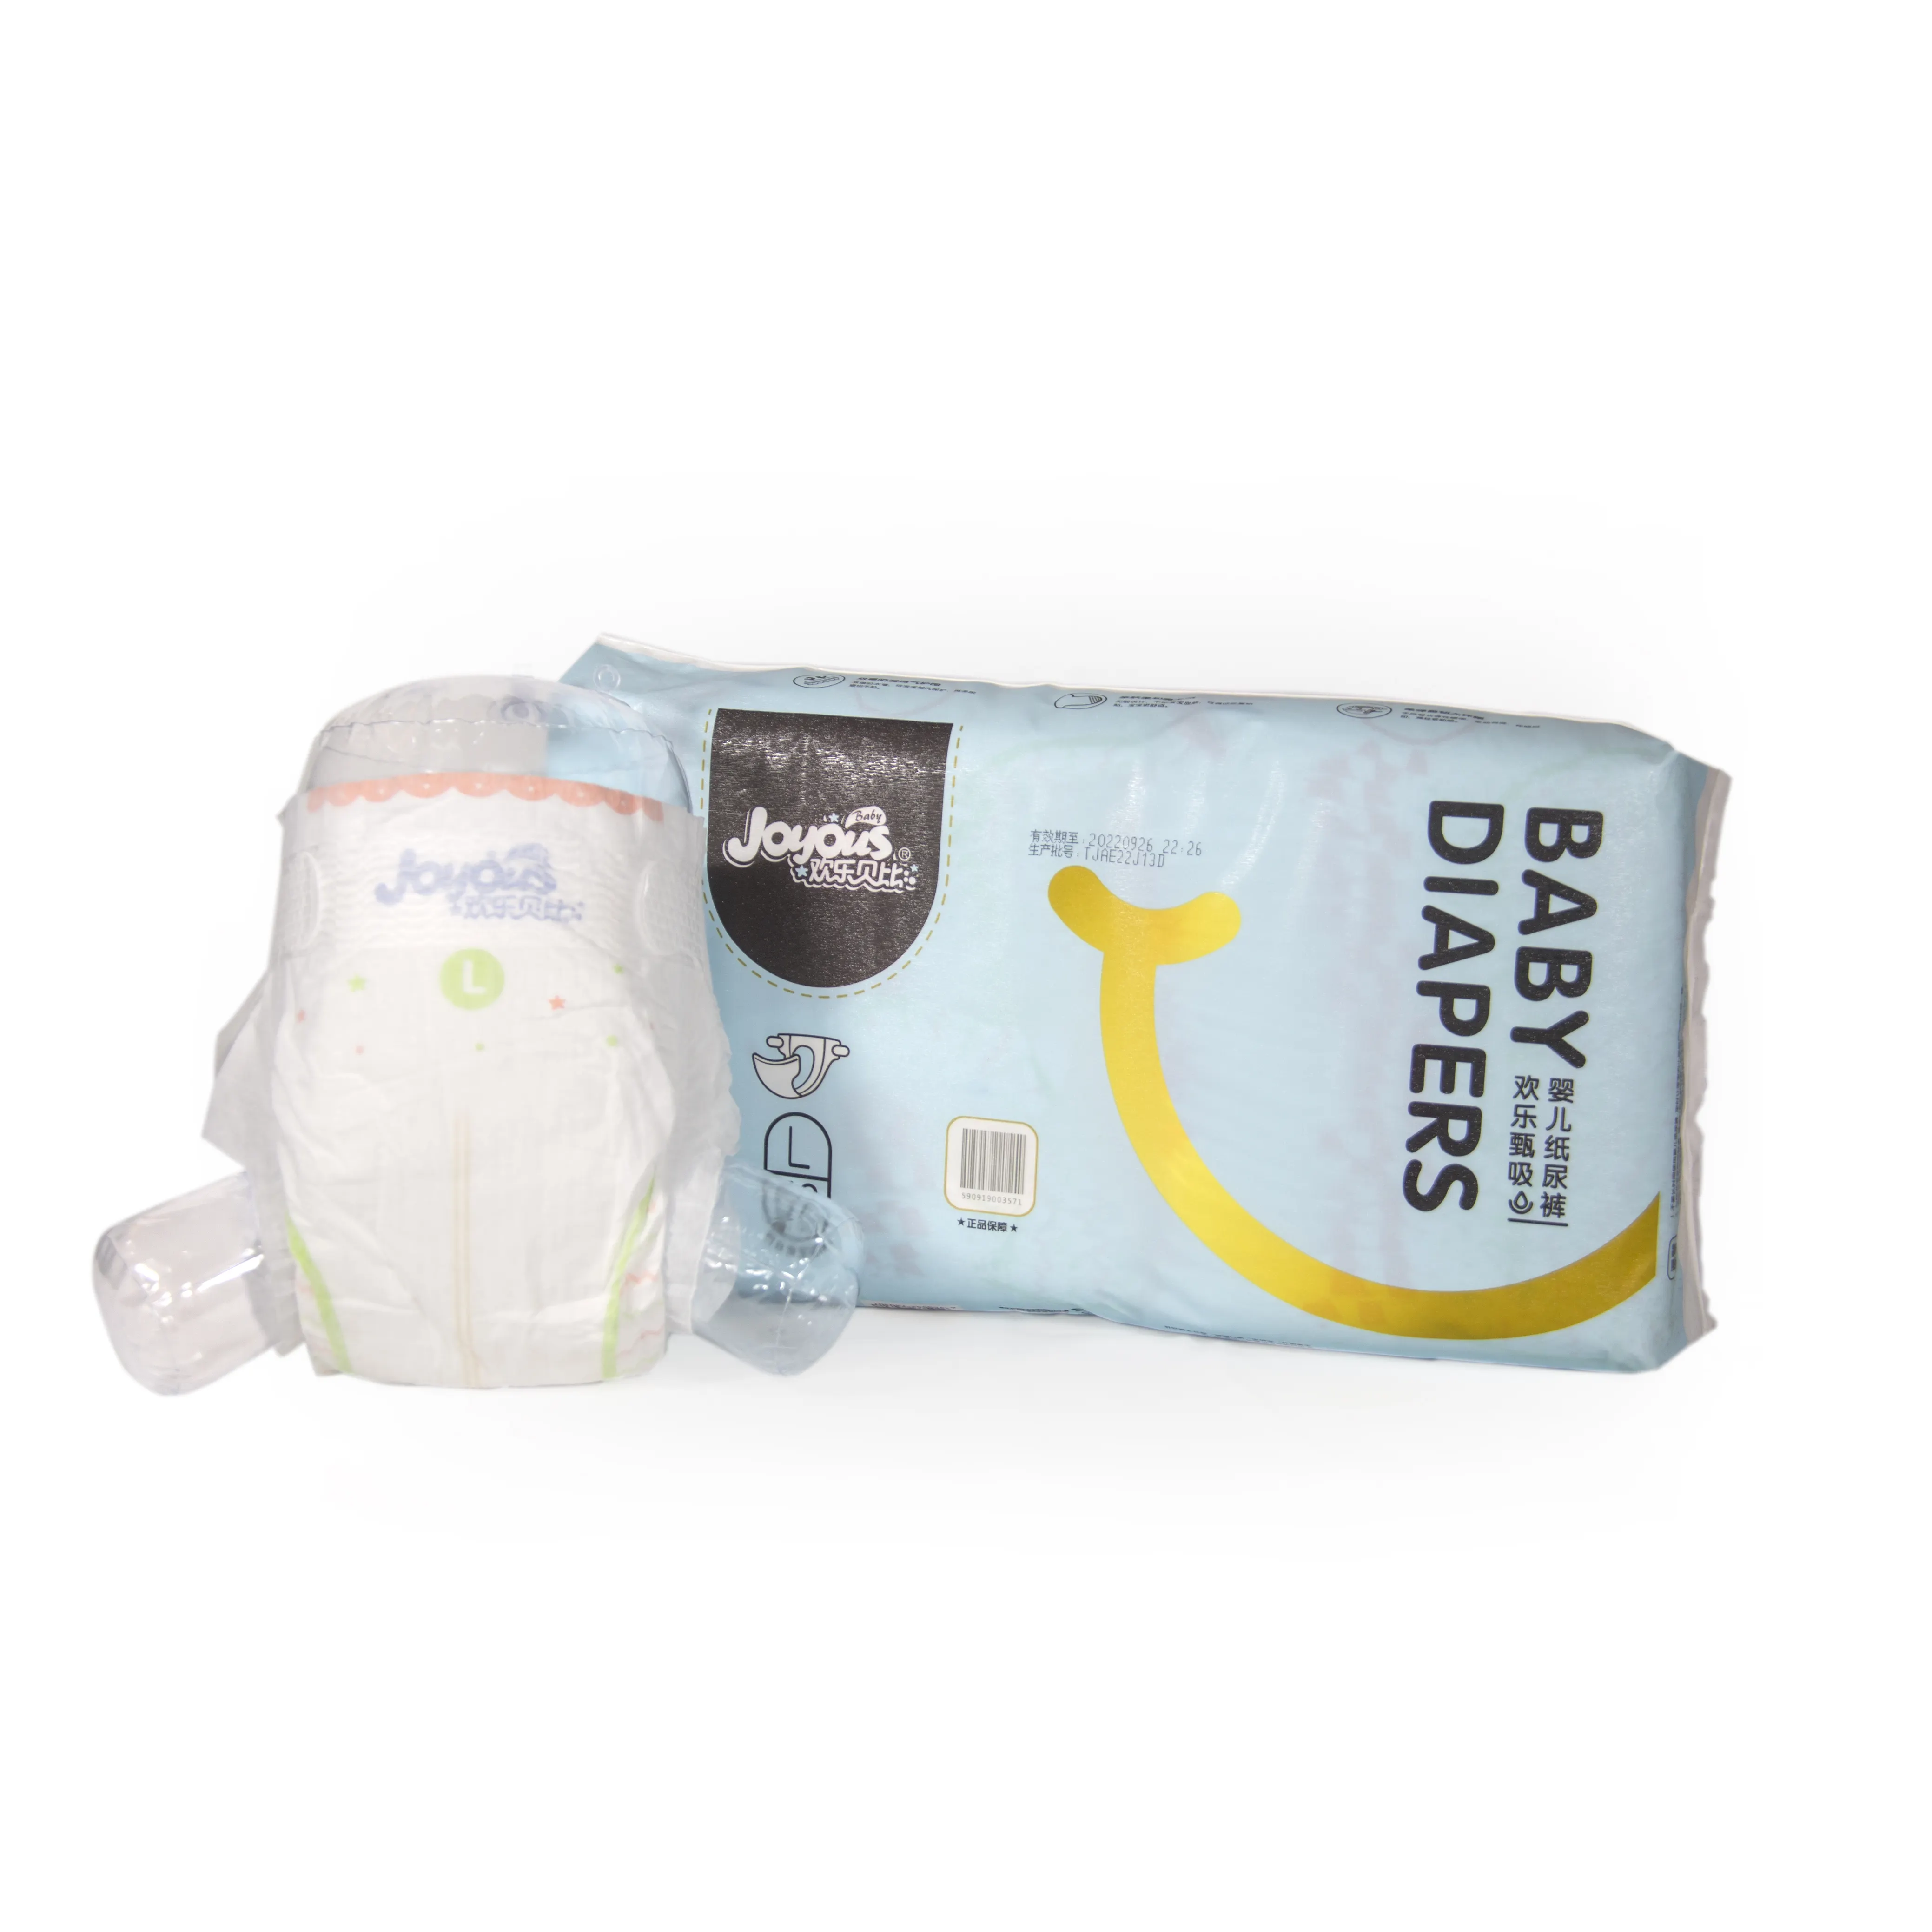 Wholesale Care USA Baby Products Manufacturers Baby Diapers in Bale Price Color Change Baby Diaper